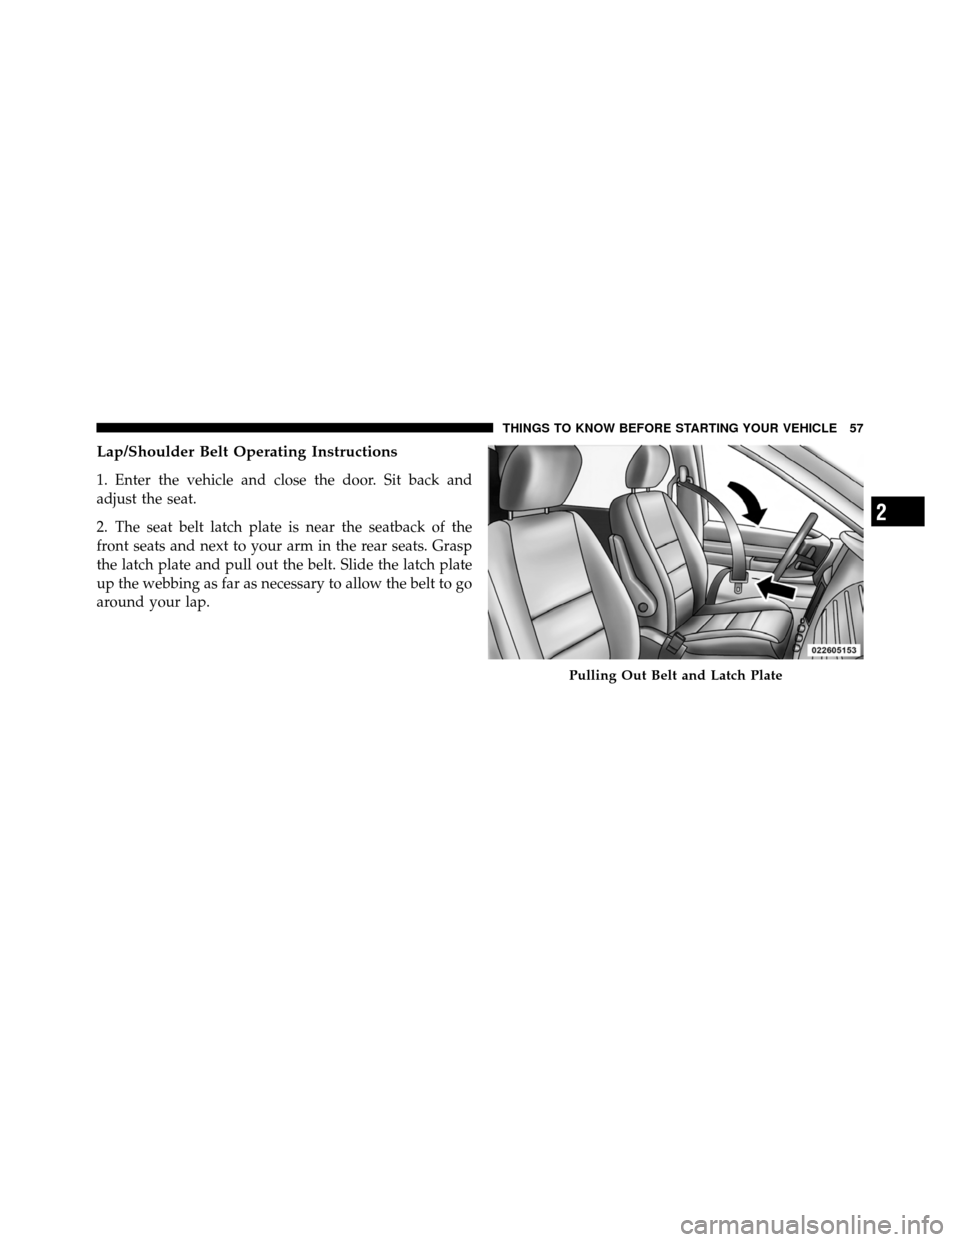 Ram Cargo Van 2012  Owners Manual Lap/Shoulder Belt Operating Instructions
1. Enter the vehicle and close the door. Sit back and
adjust the seat.
2. The seat belt latch plate is near the seatback of the
front seats and next to your ar